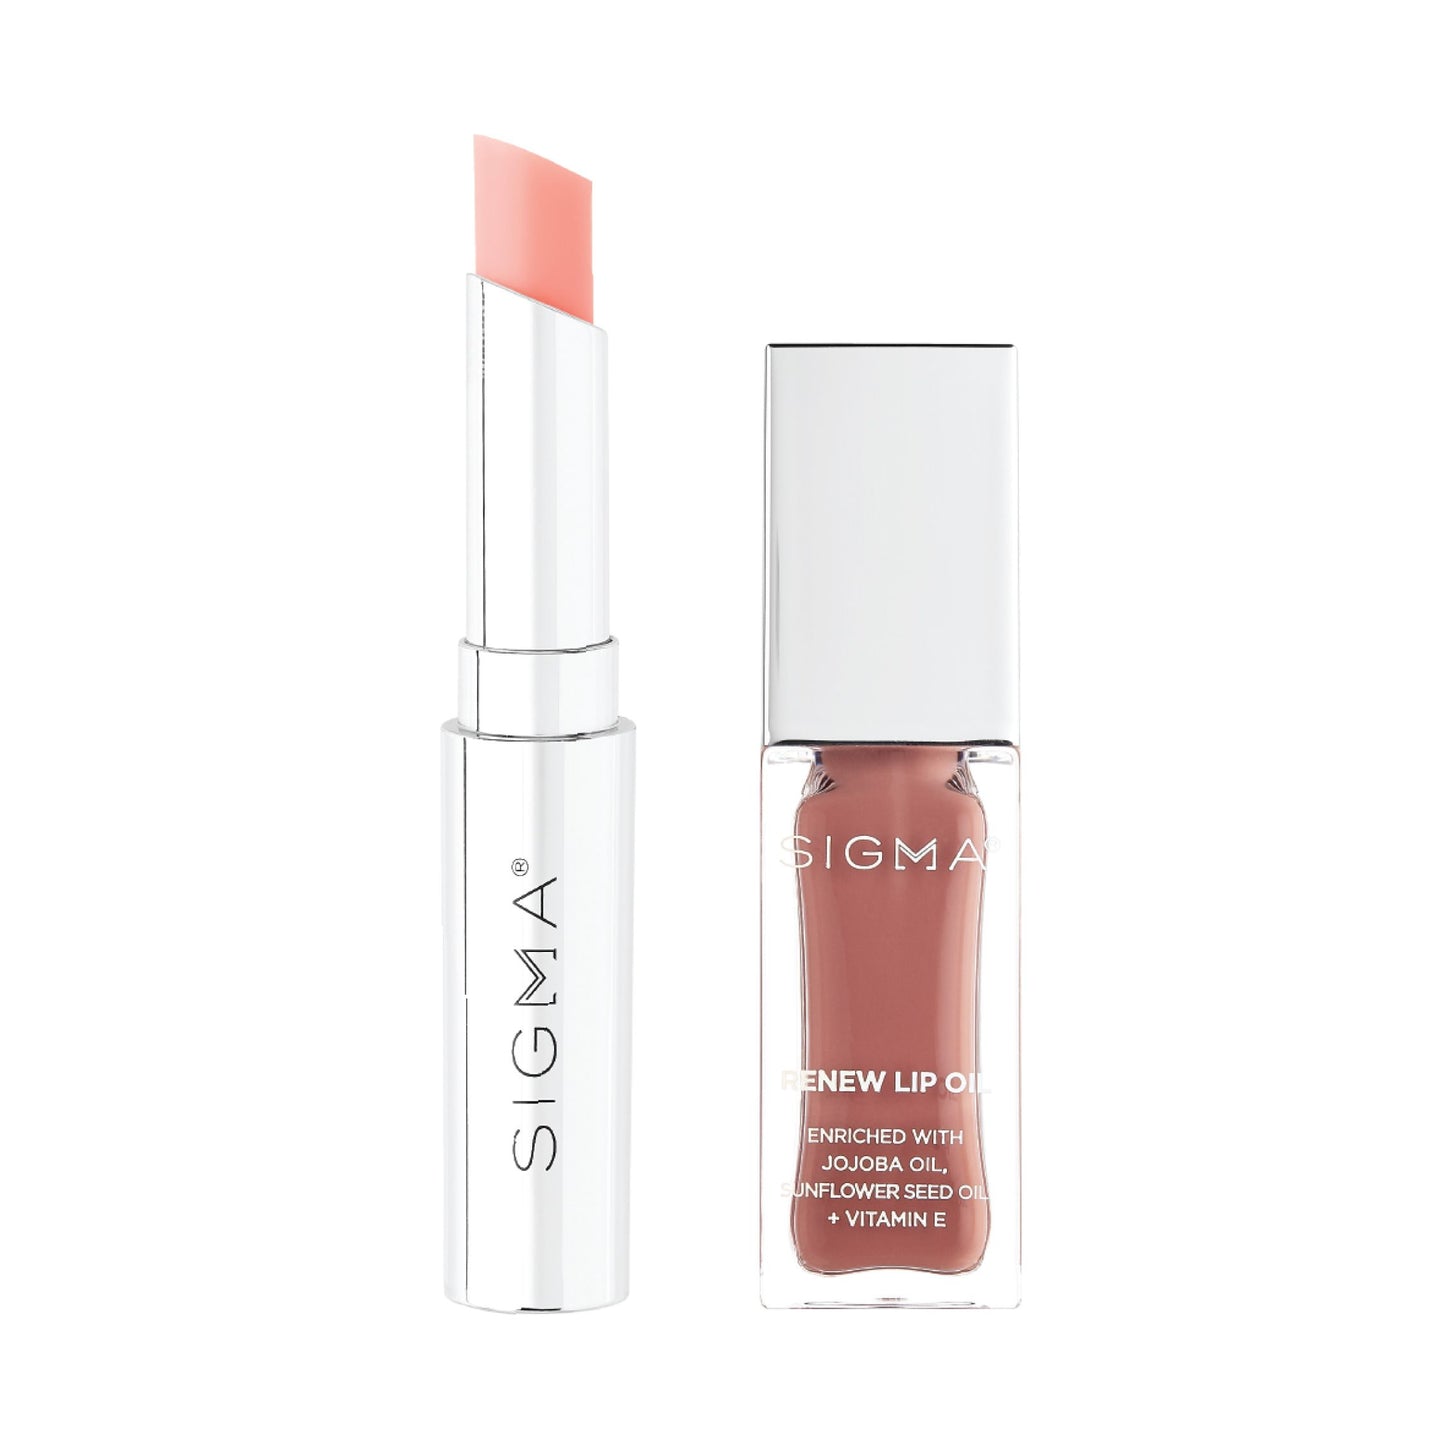 Sigma Beauty Winter Romance Wonderland Holiday Collection Snow Kissed Lip Duo